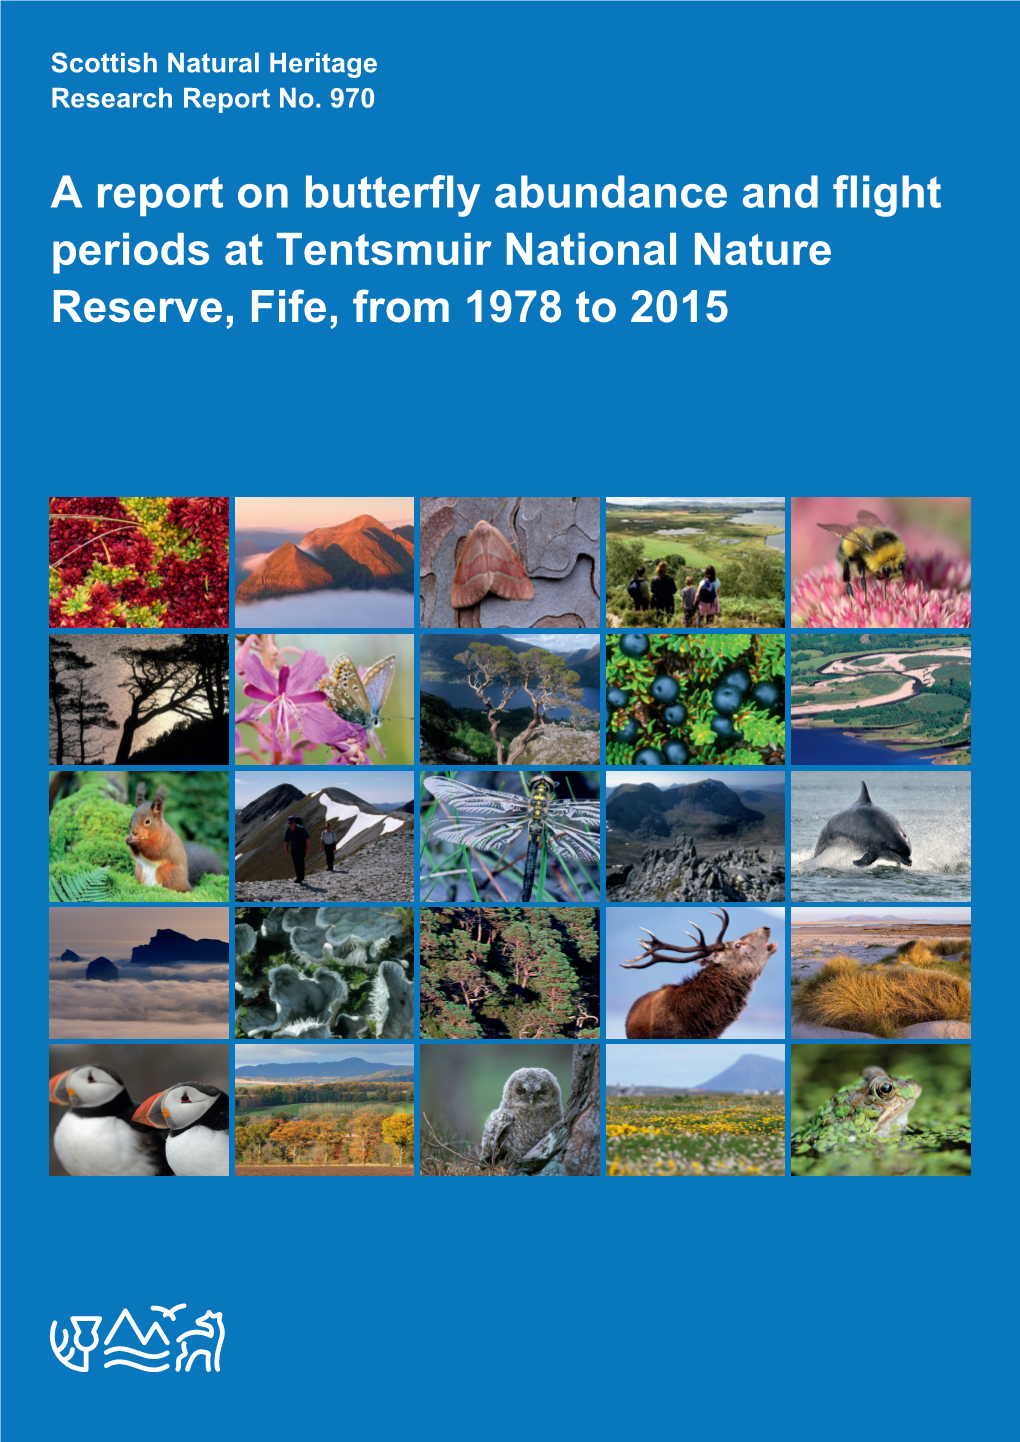 A Report on Butterfly Abundance and Flight Periods at Tentsmuir National Nature Reserve, Fife, from 1978 to 2015